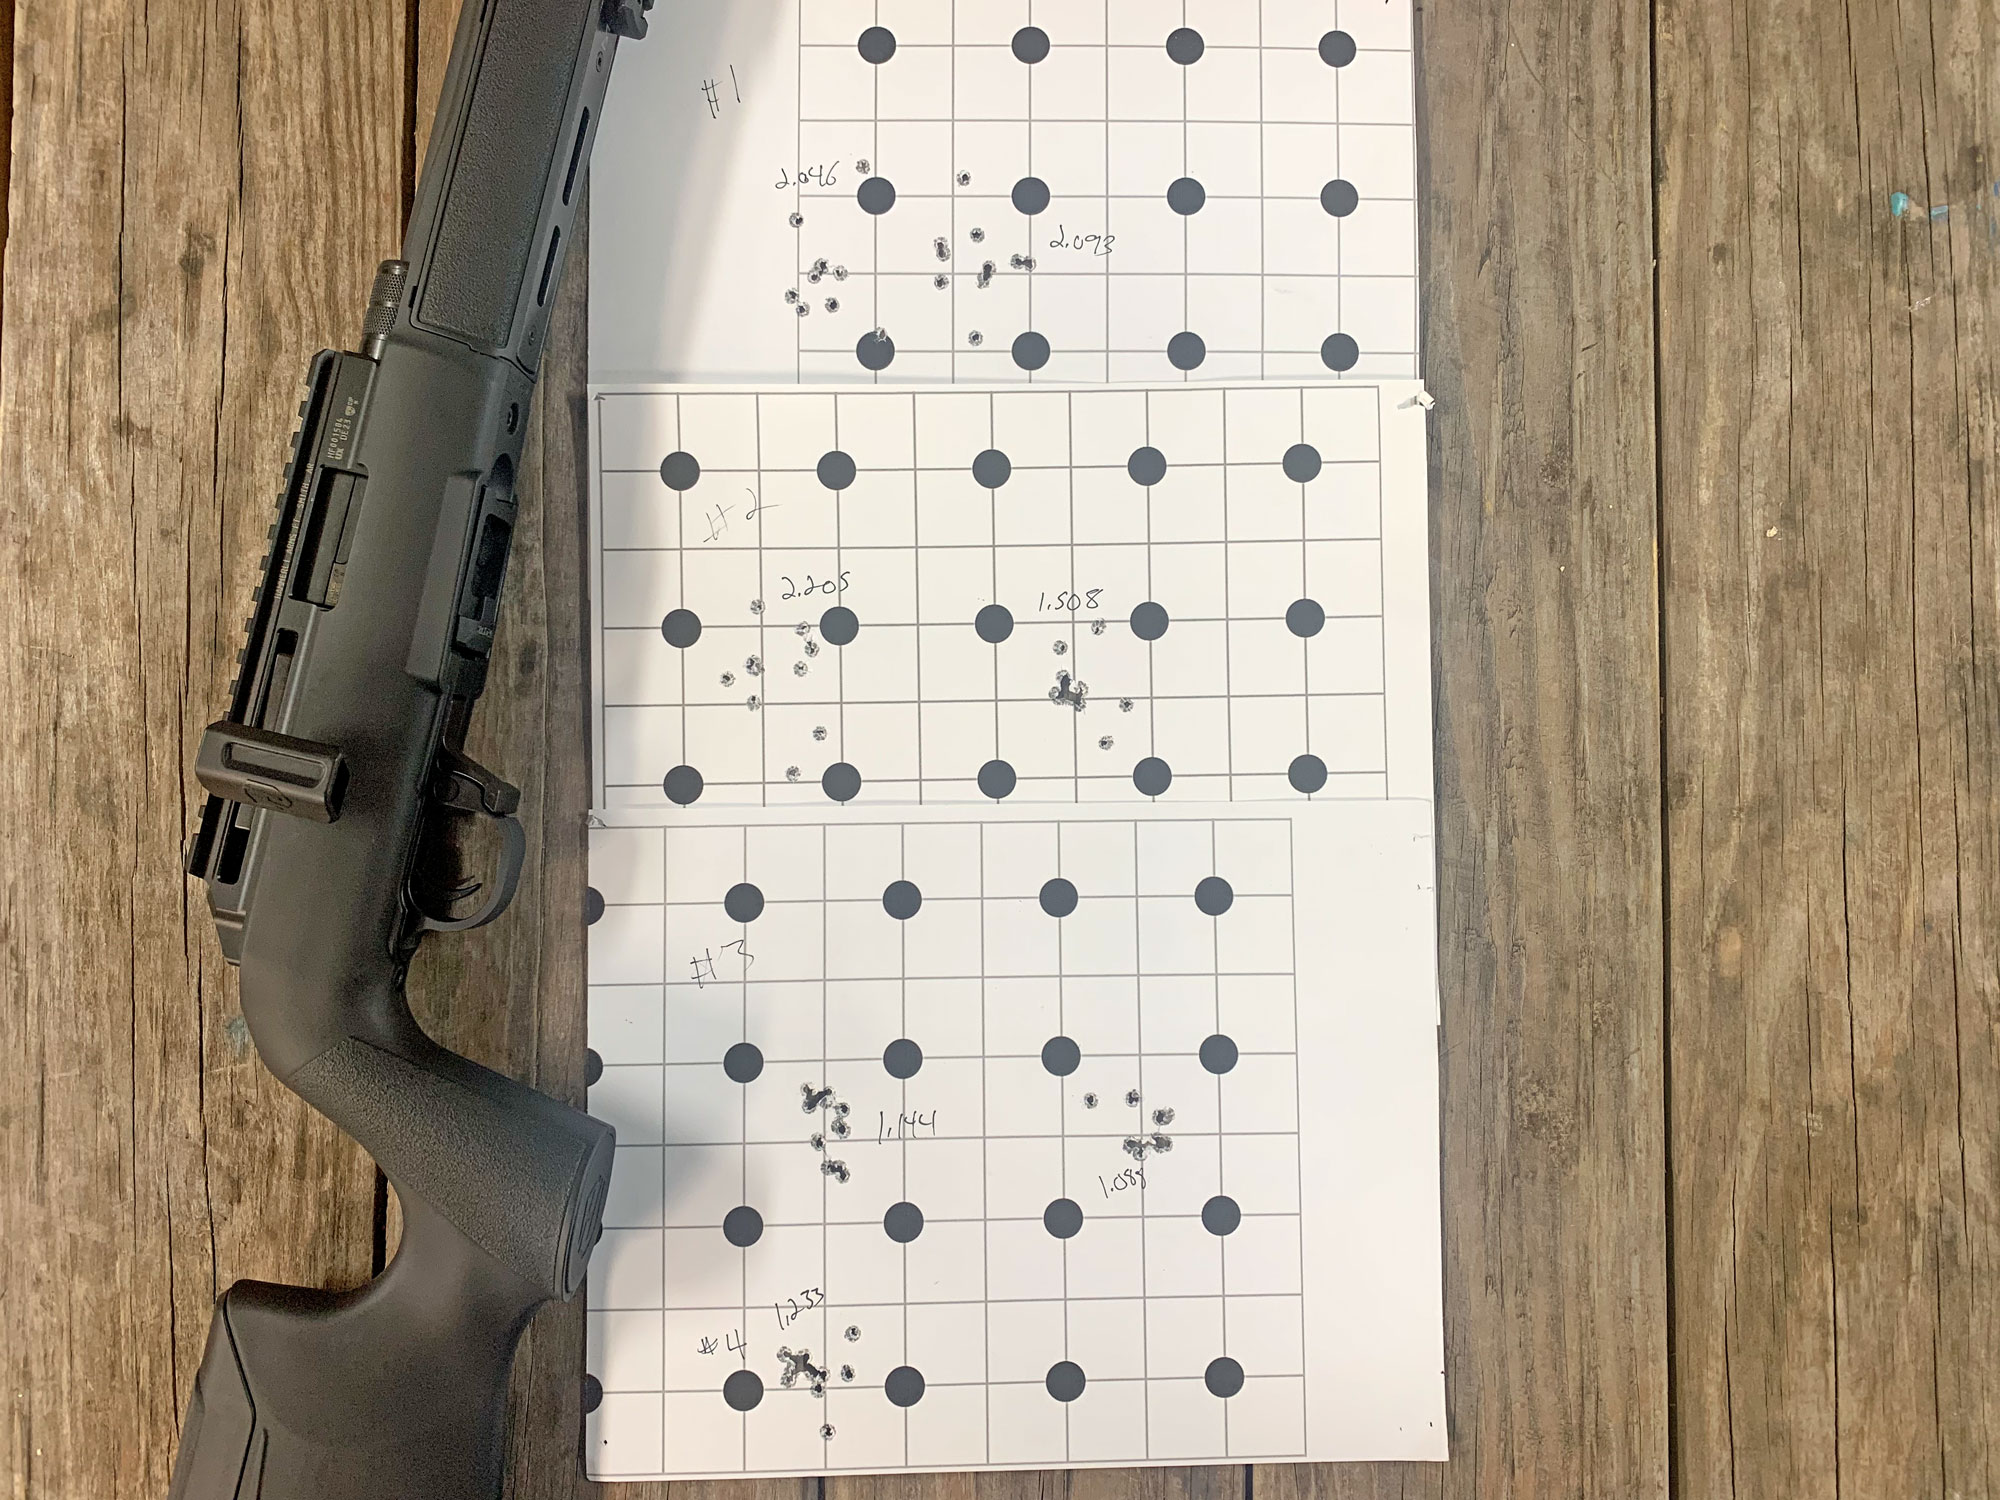 10 shot groups with the Hammerli Force B1